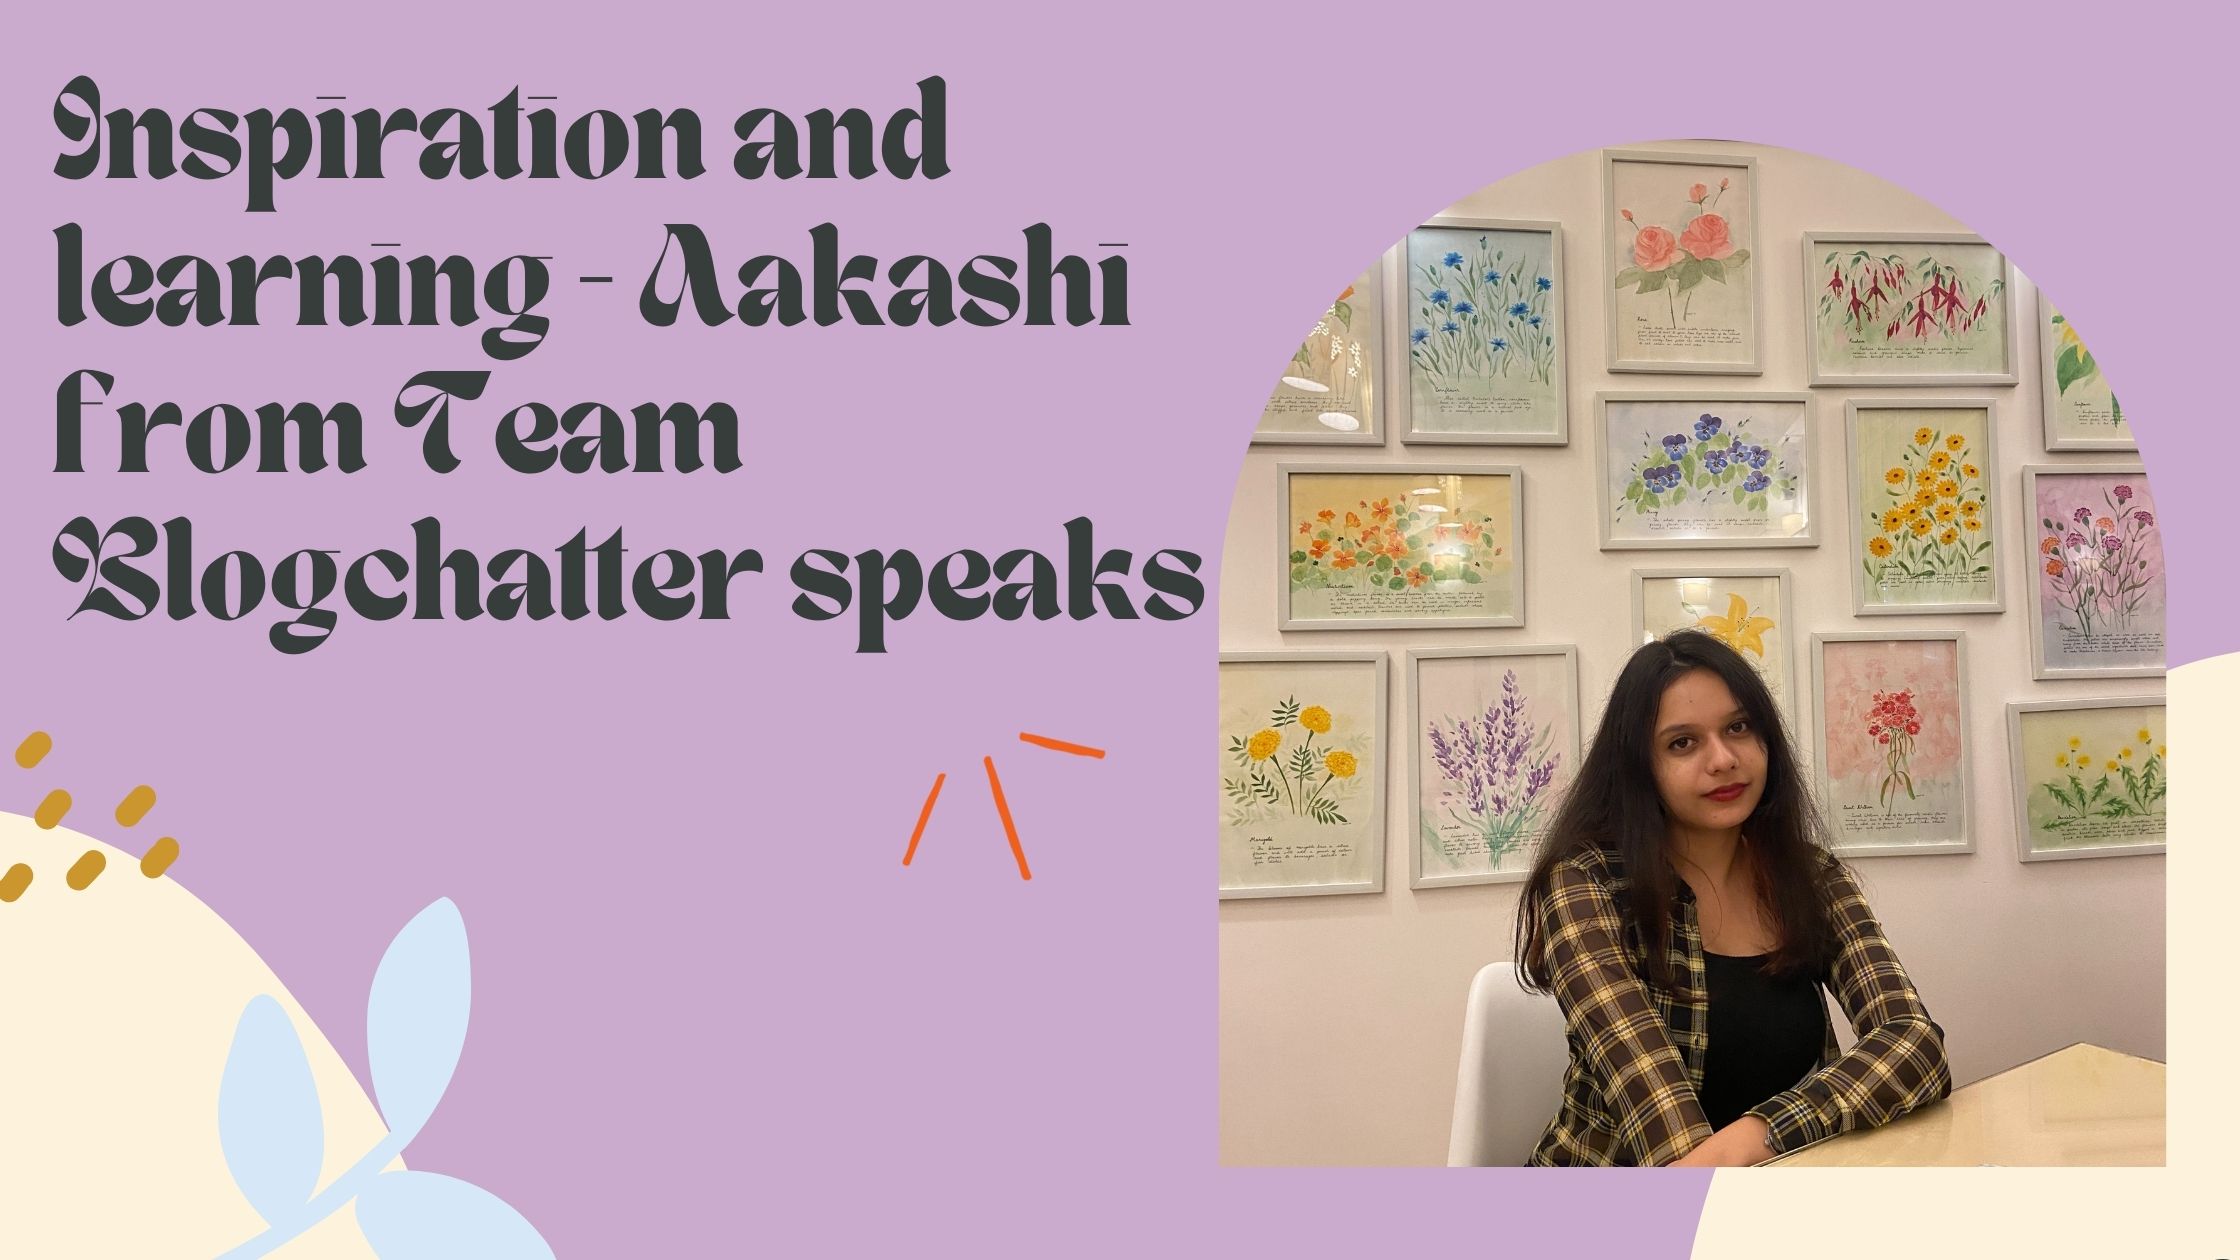 Inspiration and learning: Aakashi from Team Blogchatter speaks